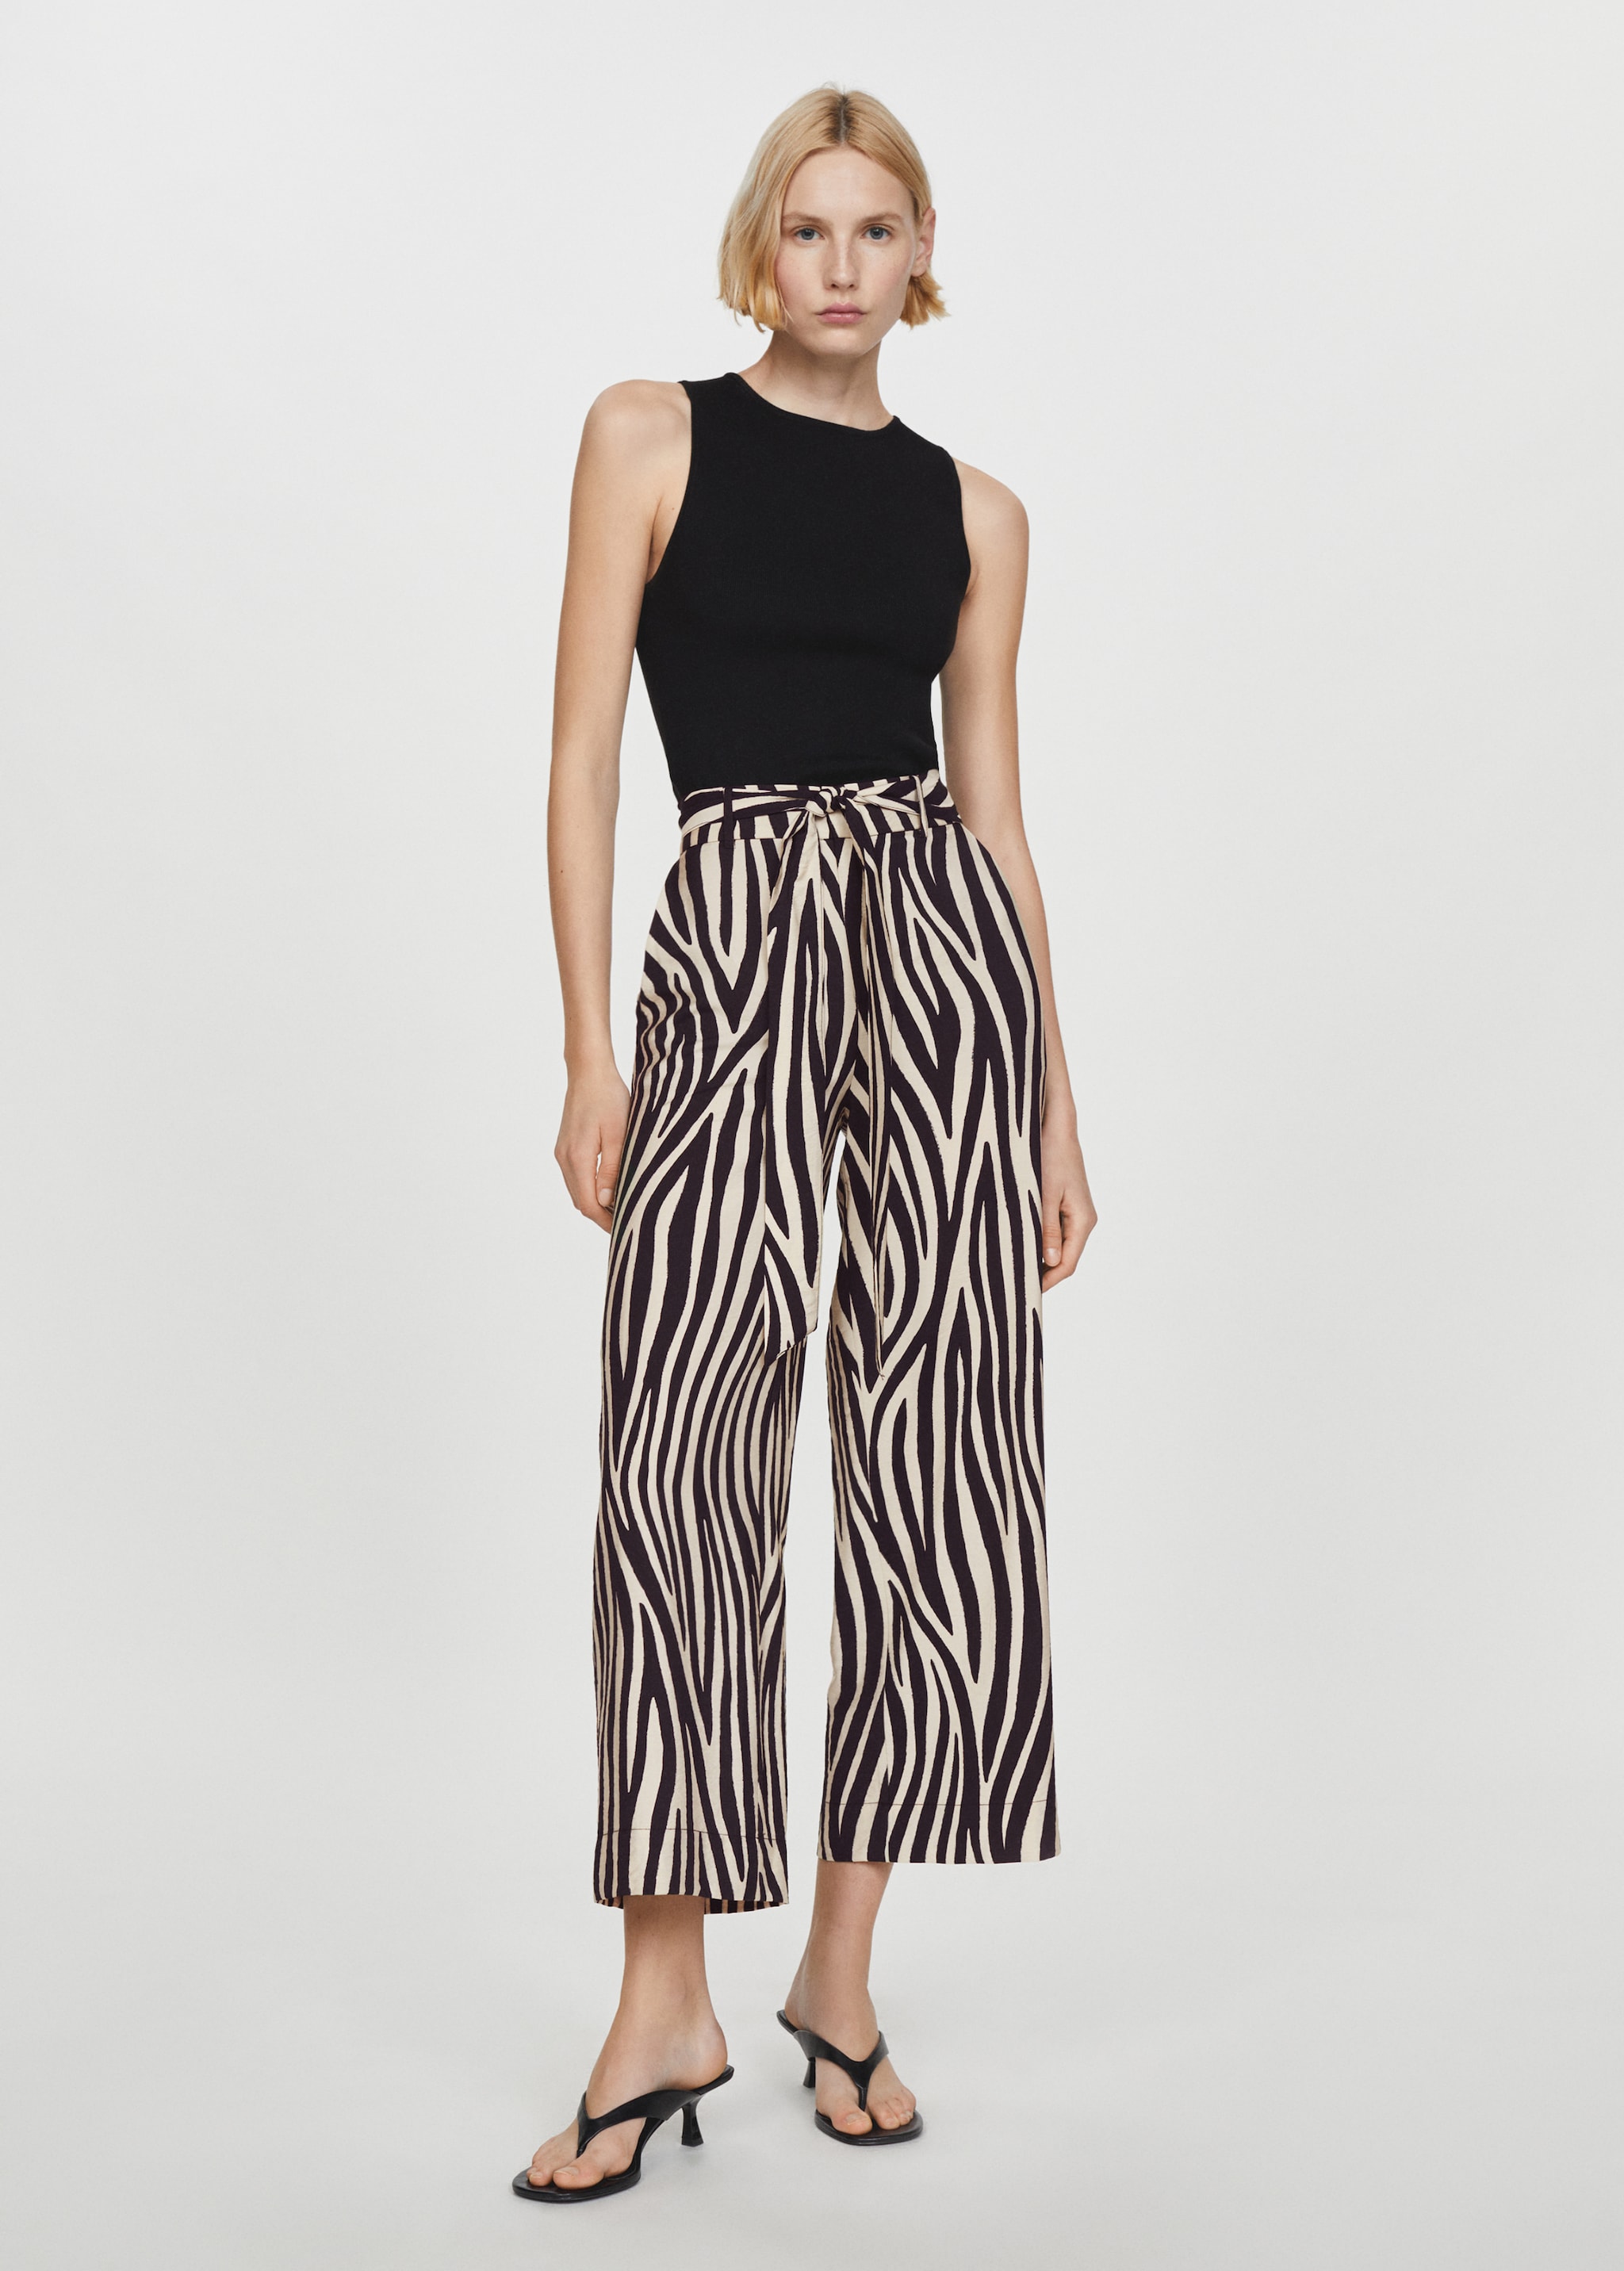 Bow printed trouser - General plane